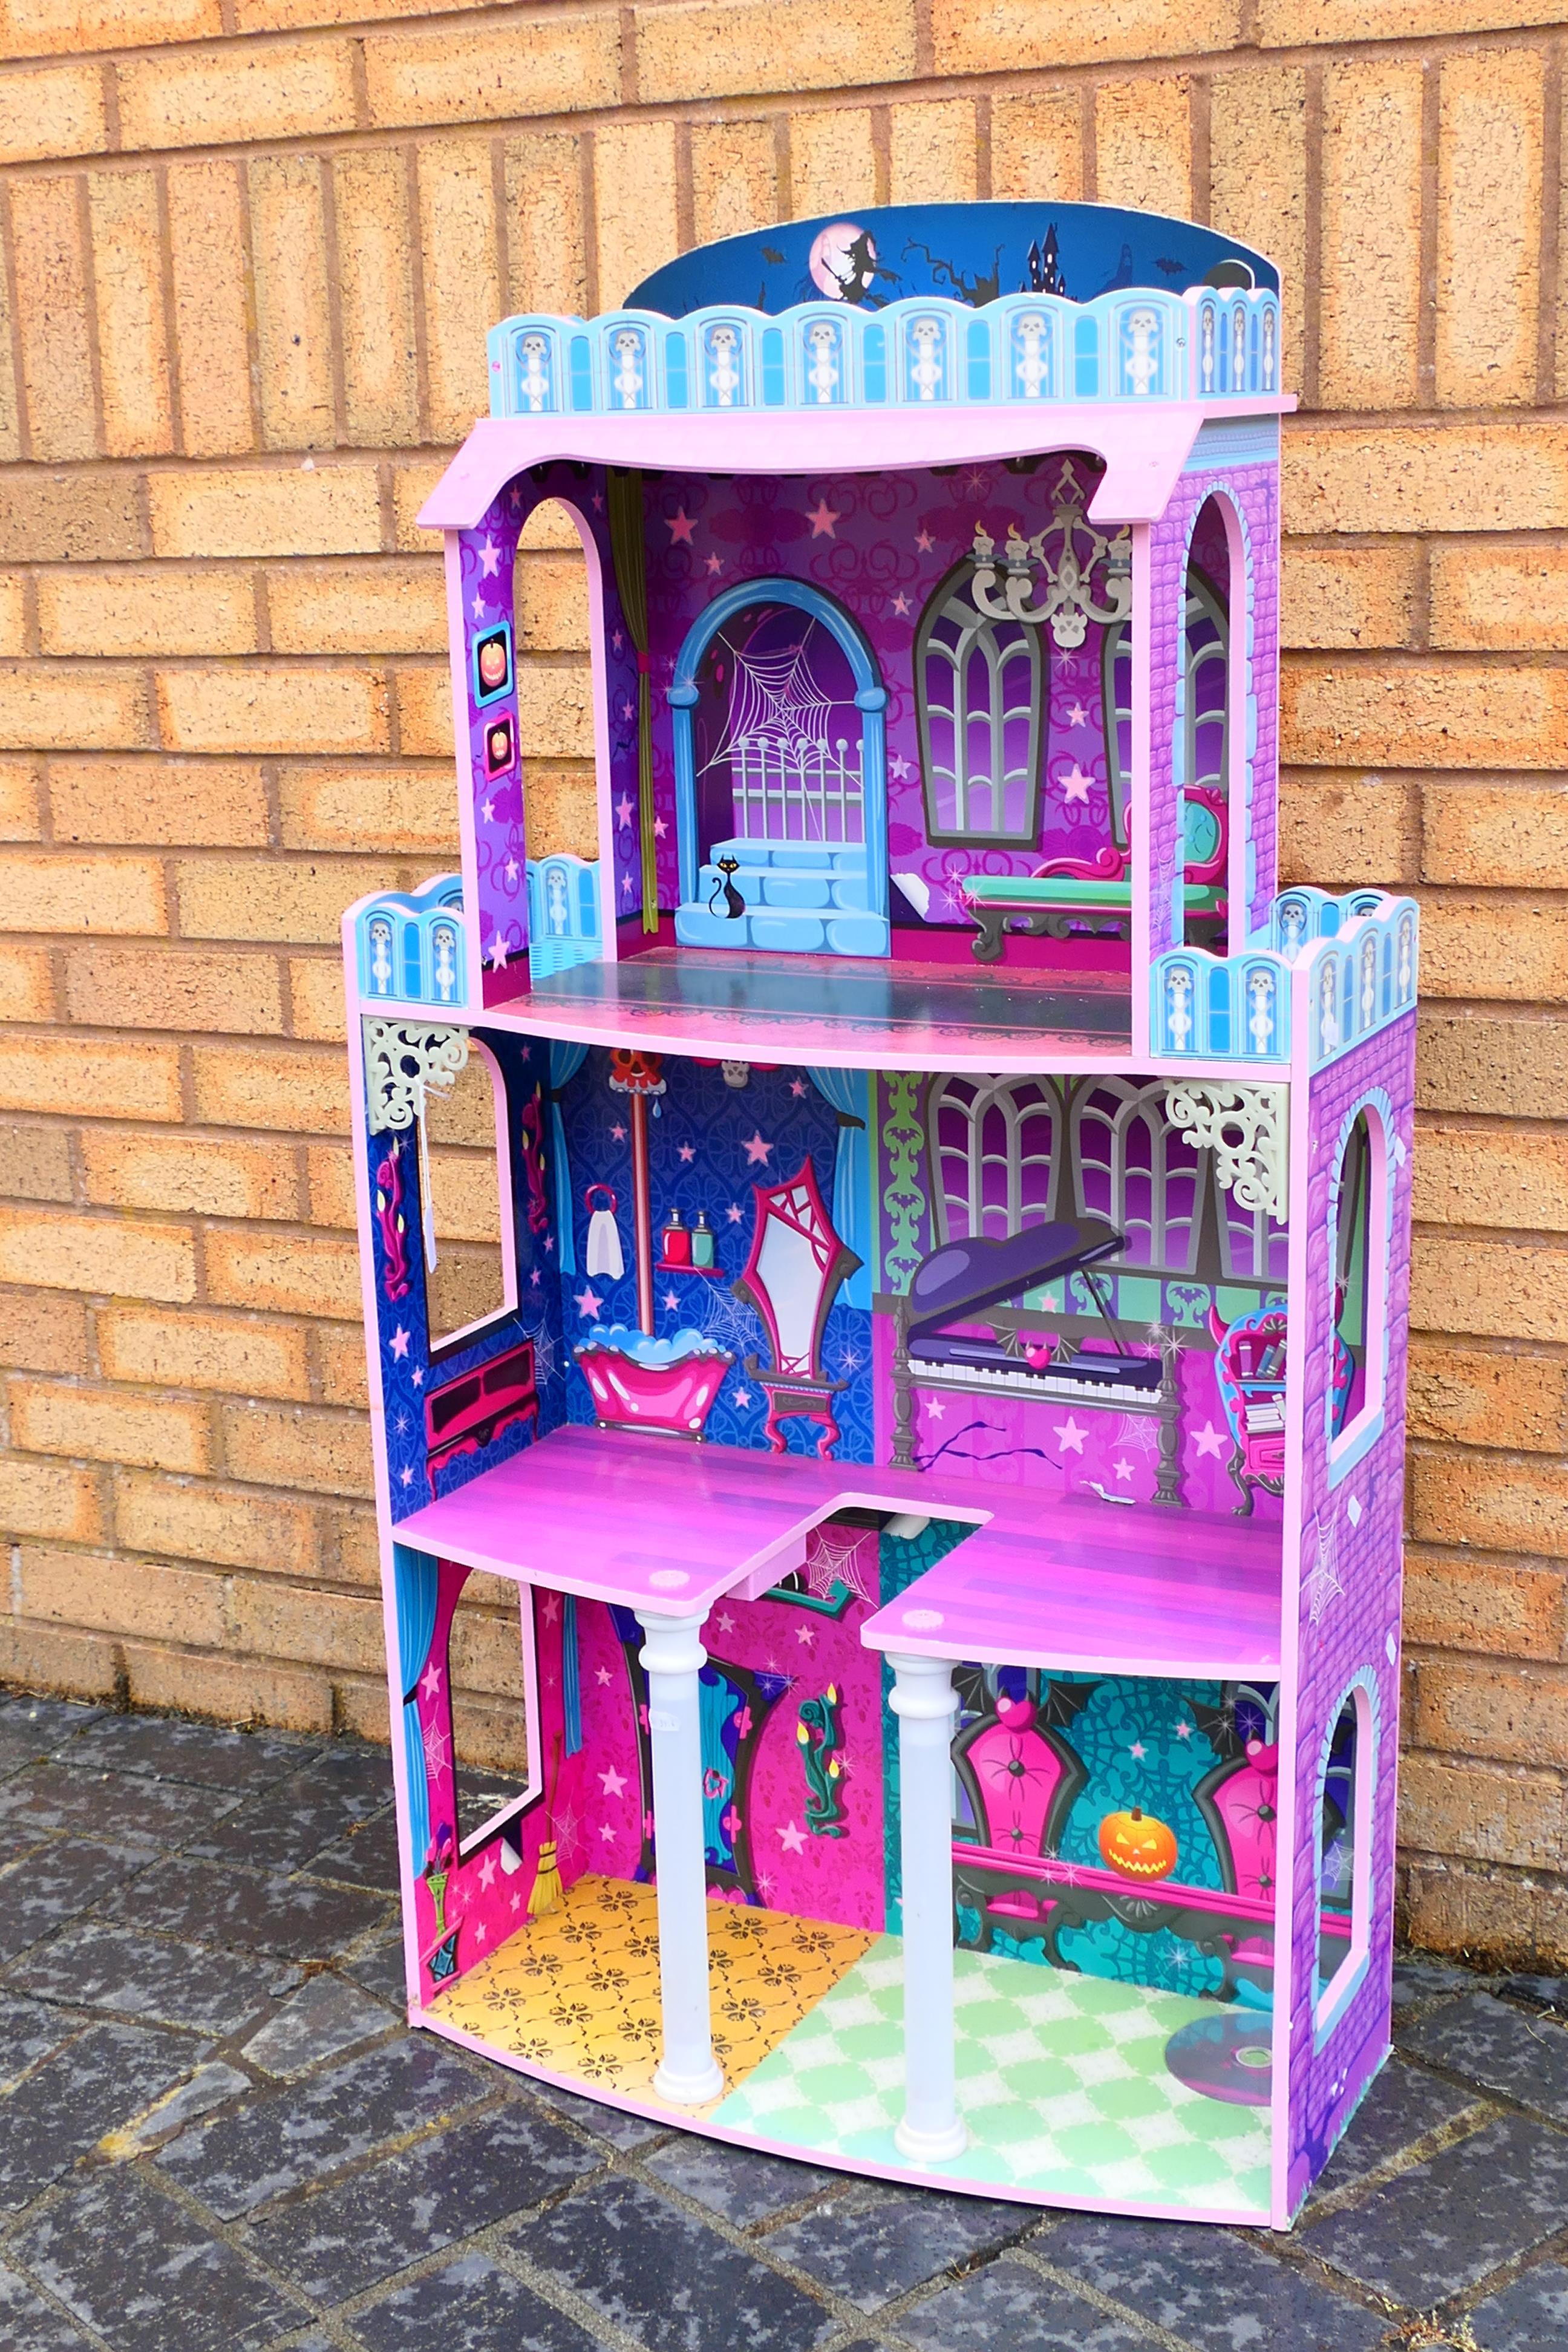 A Monster High dolls house measuring 118 x 62 x 29 cm with light up pillars. - Image 2 of 4